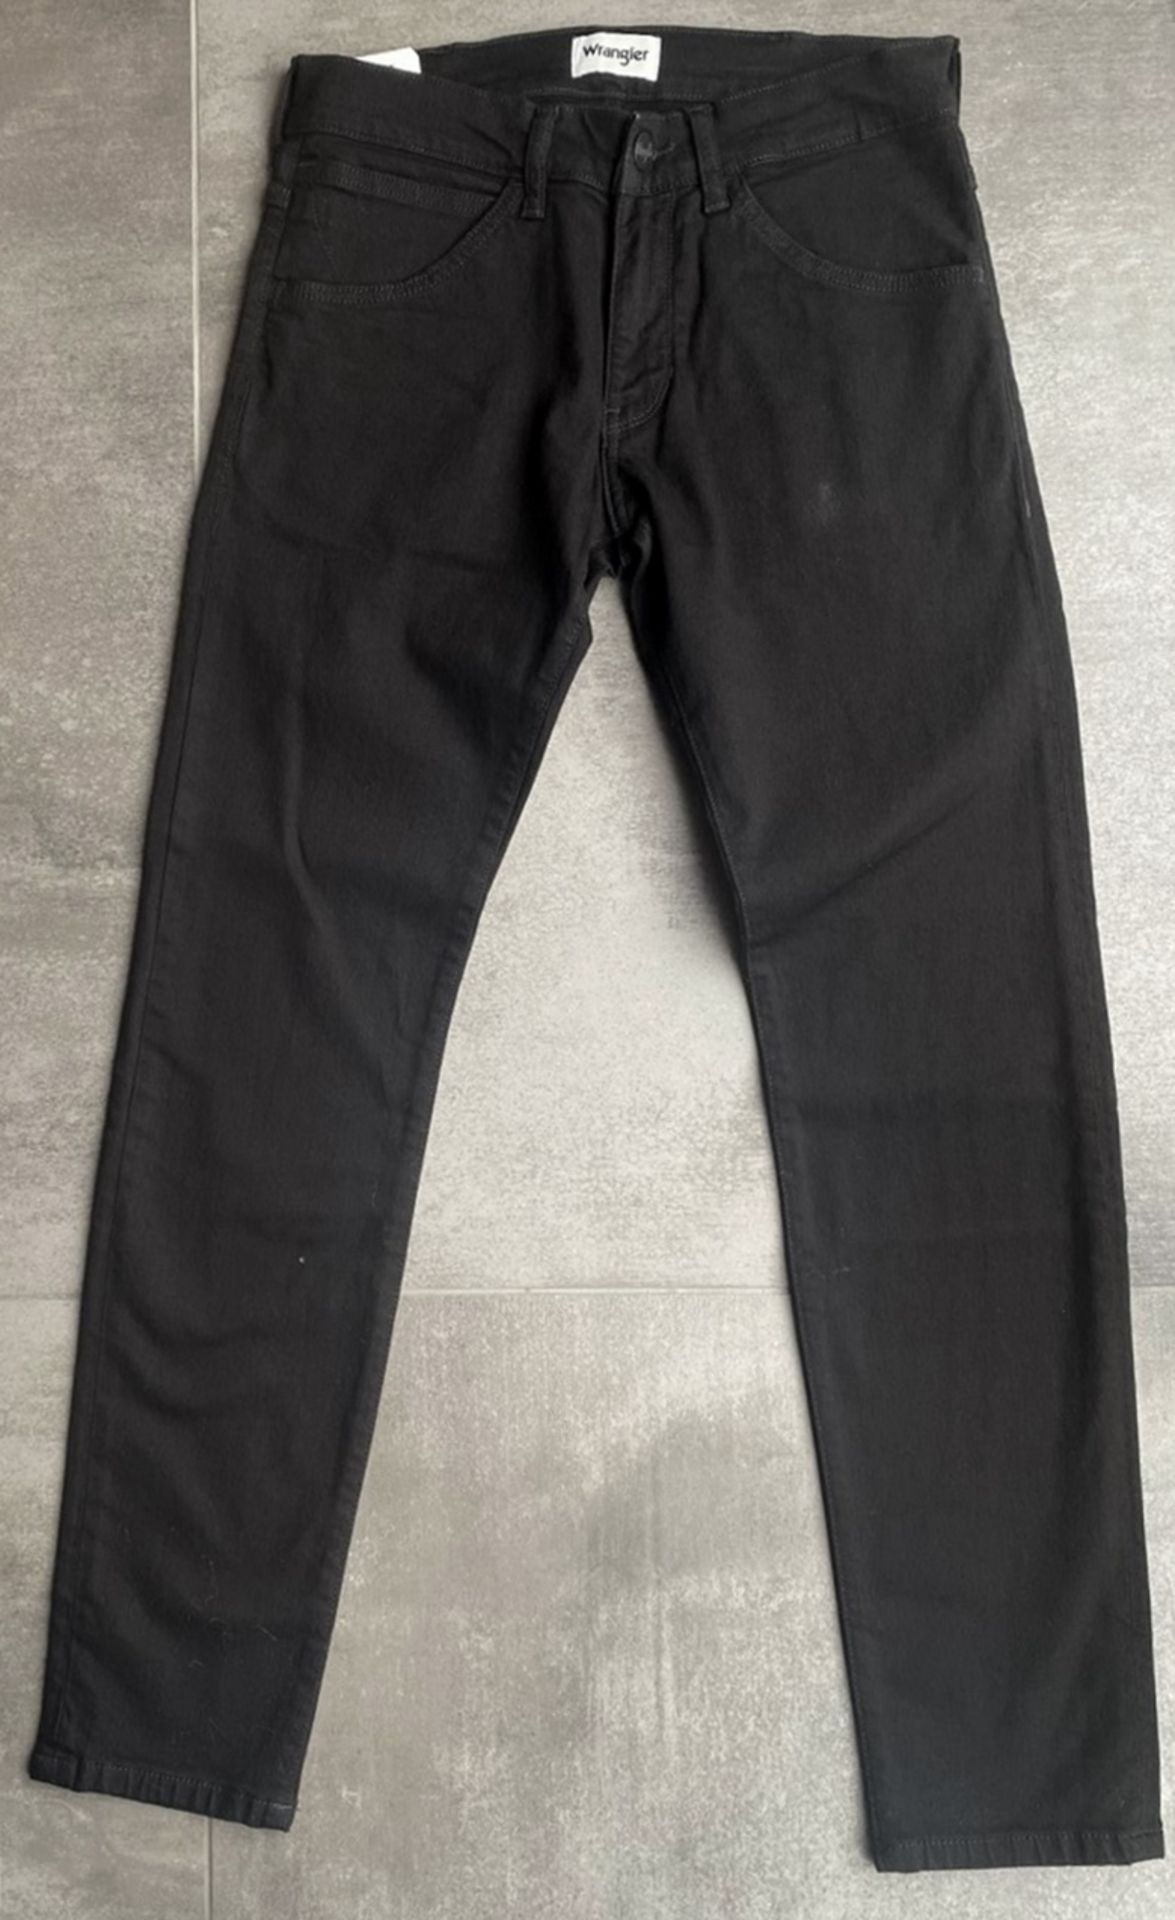 1 x Pair Of Men's Genuine Wrangler Jeans In Black - Size: 30/32 - Preowned, Like New With Tags - - Image 7 of 10